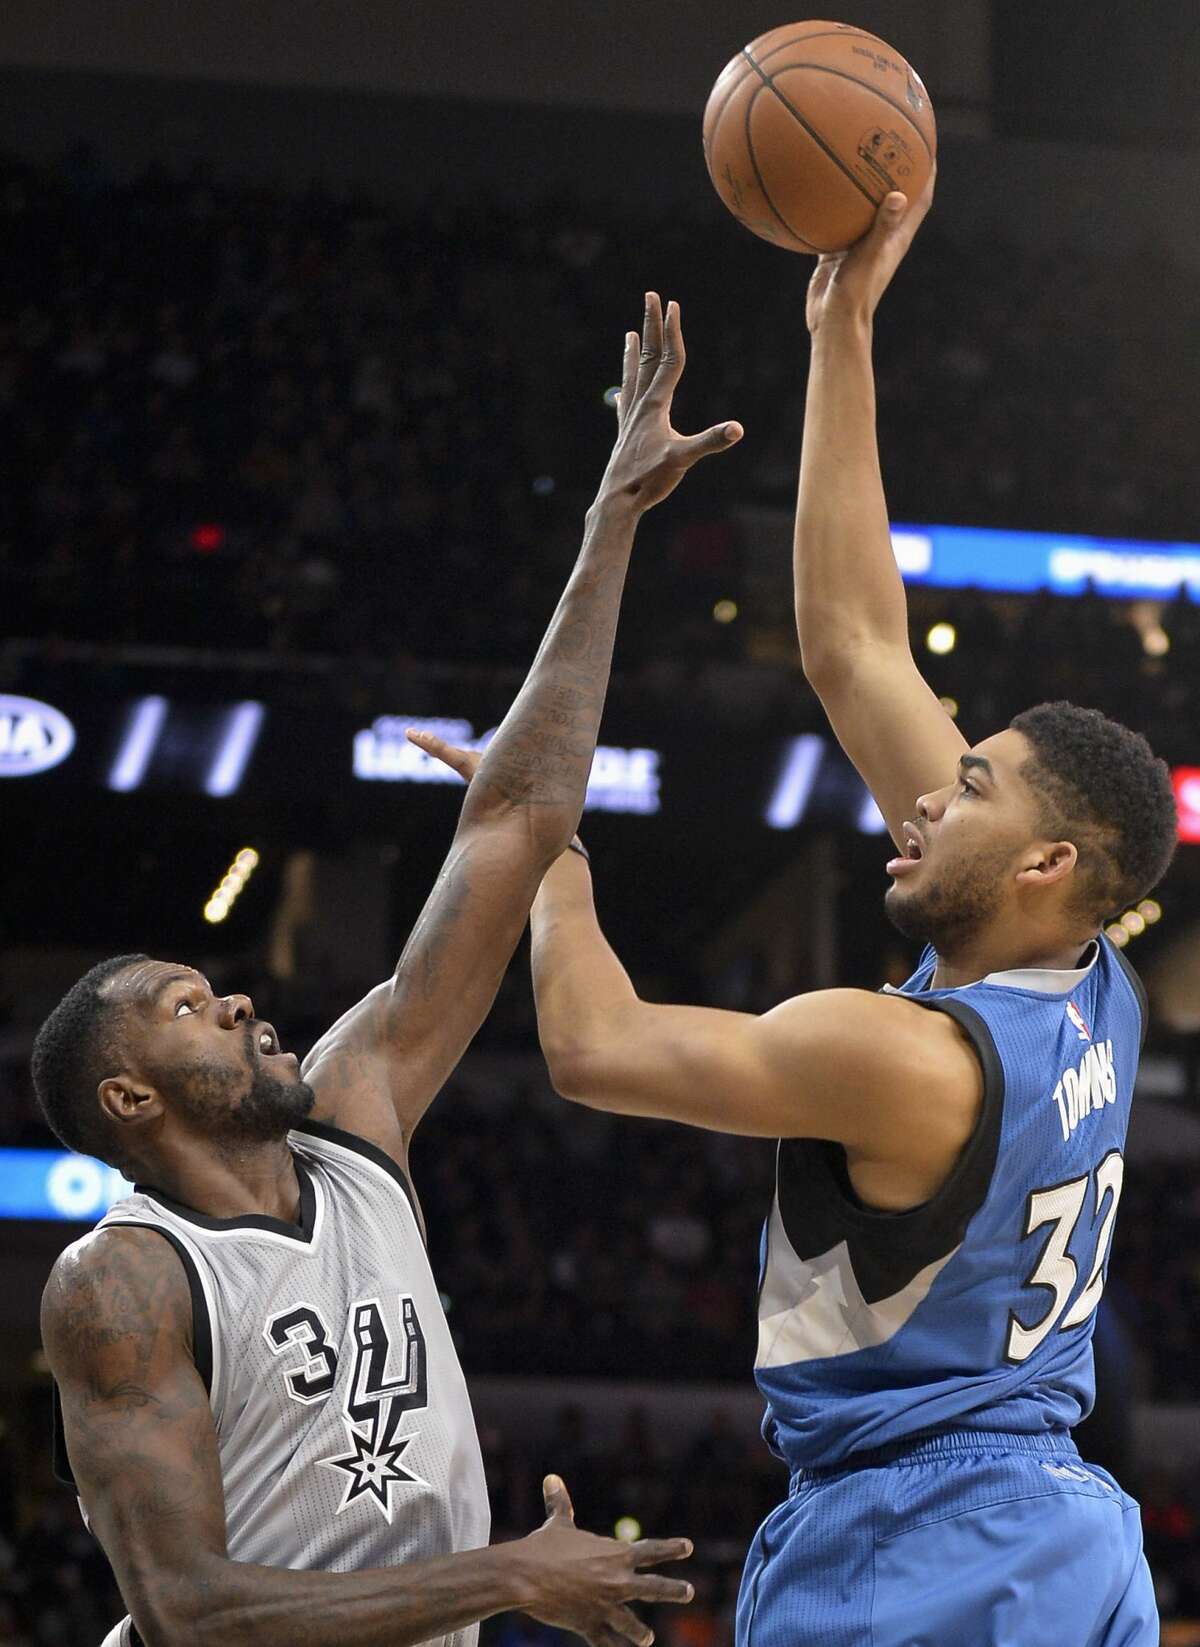 Minnesota Timberwolves center Karl Anthony-Towns, right, shoots against San Antonio Spurs center Dewayne Dedmon during the first half of an NBA basketball game, Saturday, March 4, 2017, in San Antonio. (AP Photo/Darren Abate)